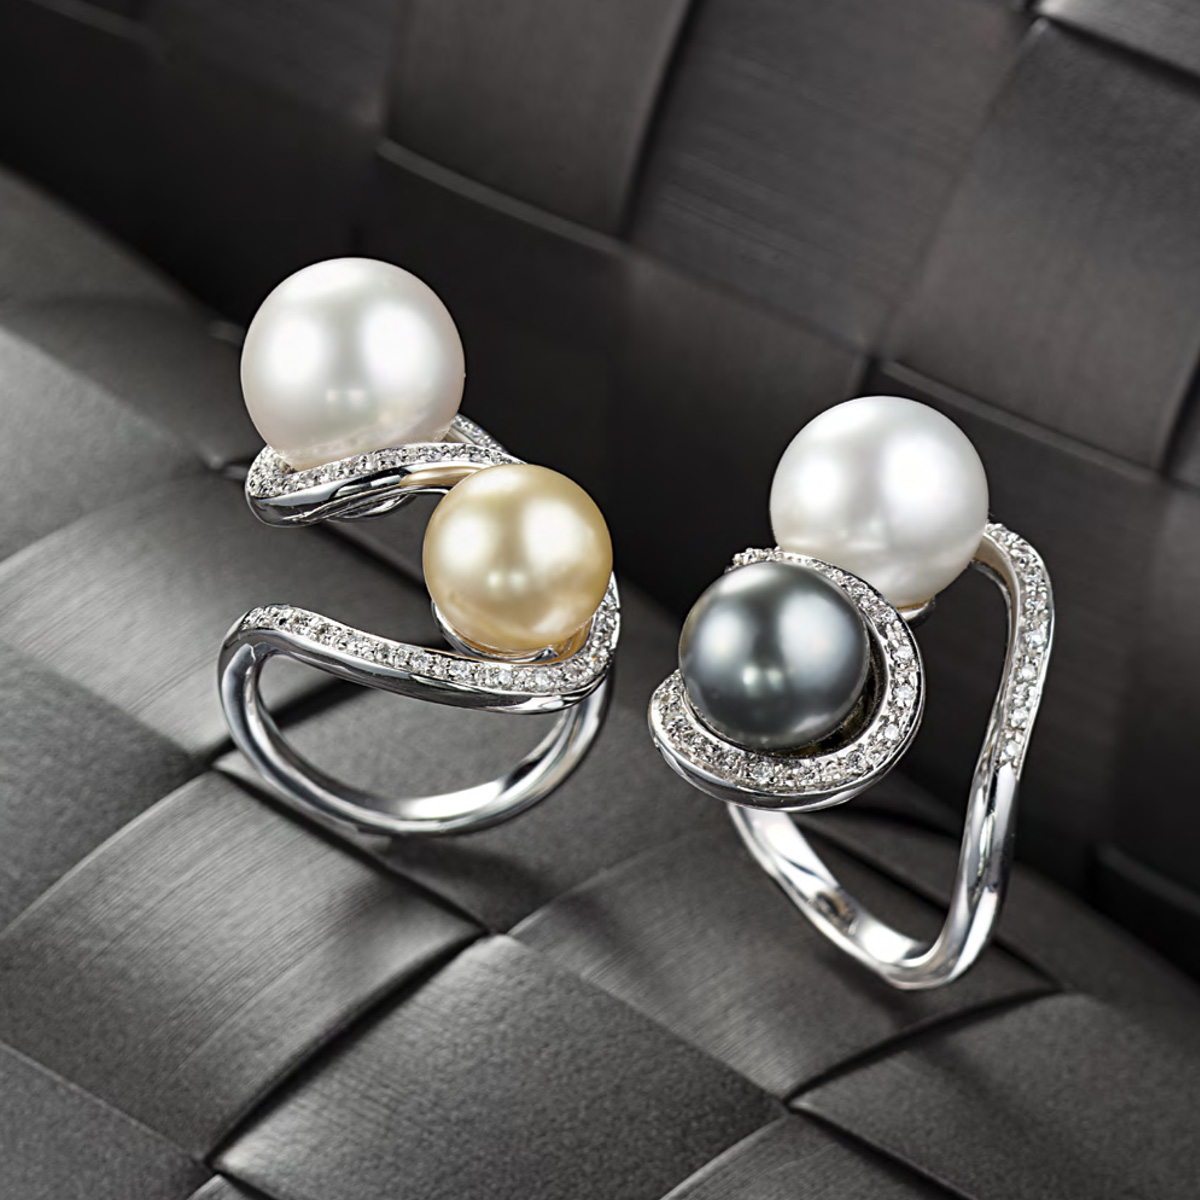 Anelli con Perle - Pearls rings